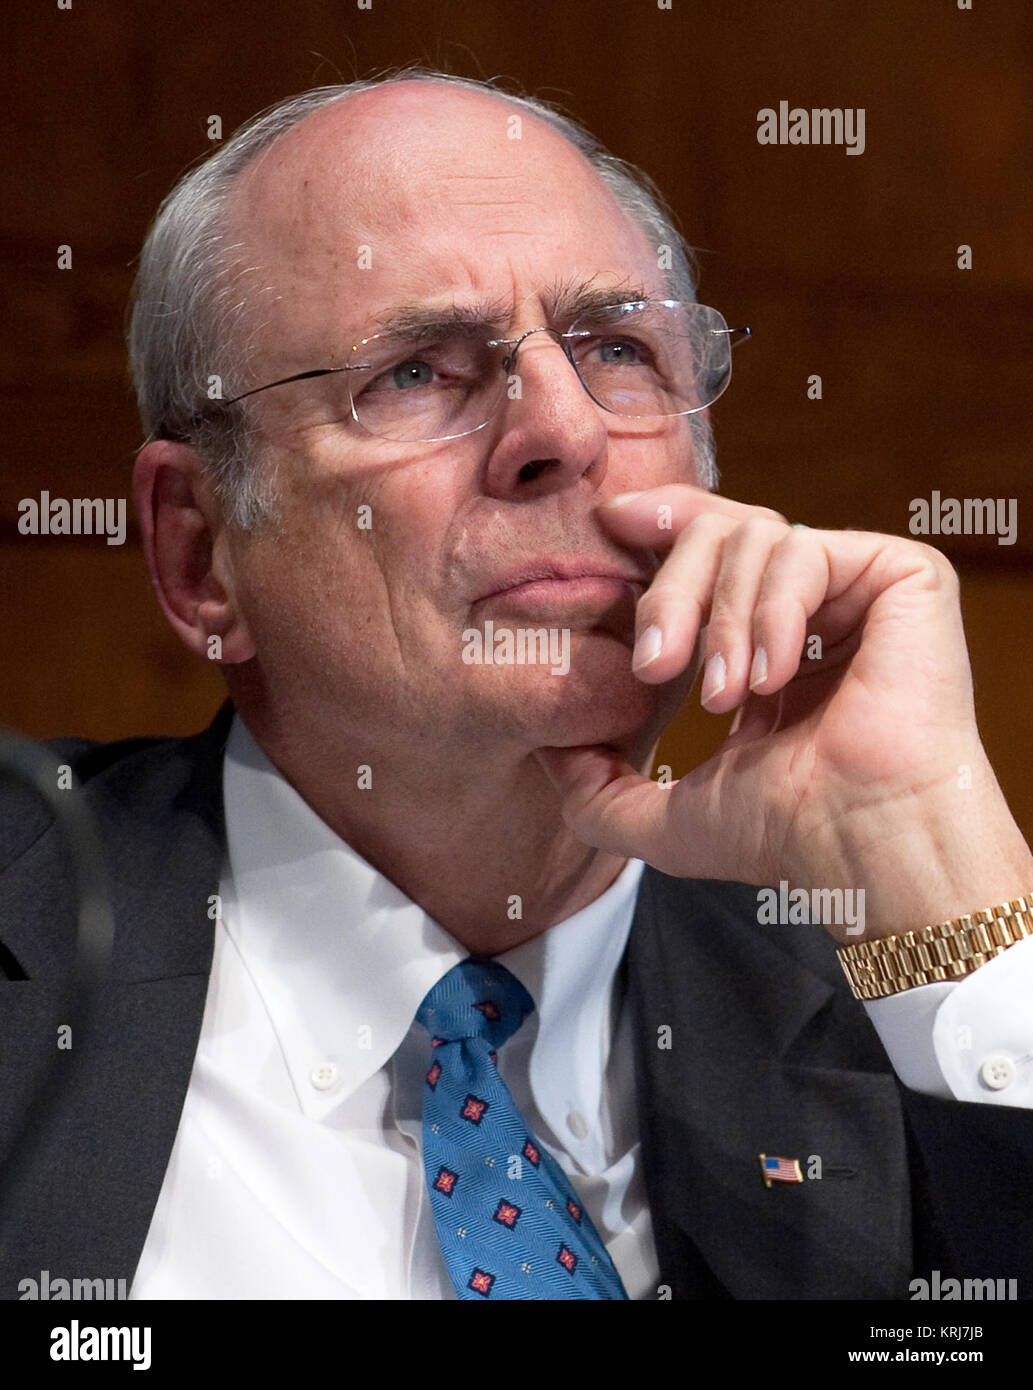 Norman Augustine, chair of the Human Space Flight Review Committee, listens to a comment from the audience during the first of several public meetings at different U.S. locations, Wednesday, June 17, 2009, at the Carnegie Institution in Washington. The panel will examine ongoing and planned NASA development activities and potential alternatives in order to present options for advancing a safe, innovative, affordable and sustainable human space flight program following the space shuttle's retirement. The committee wil present its results by August 2009.  Photo Credit: (NASA/Paul E. Alers) Norma Stock Photo